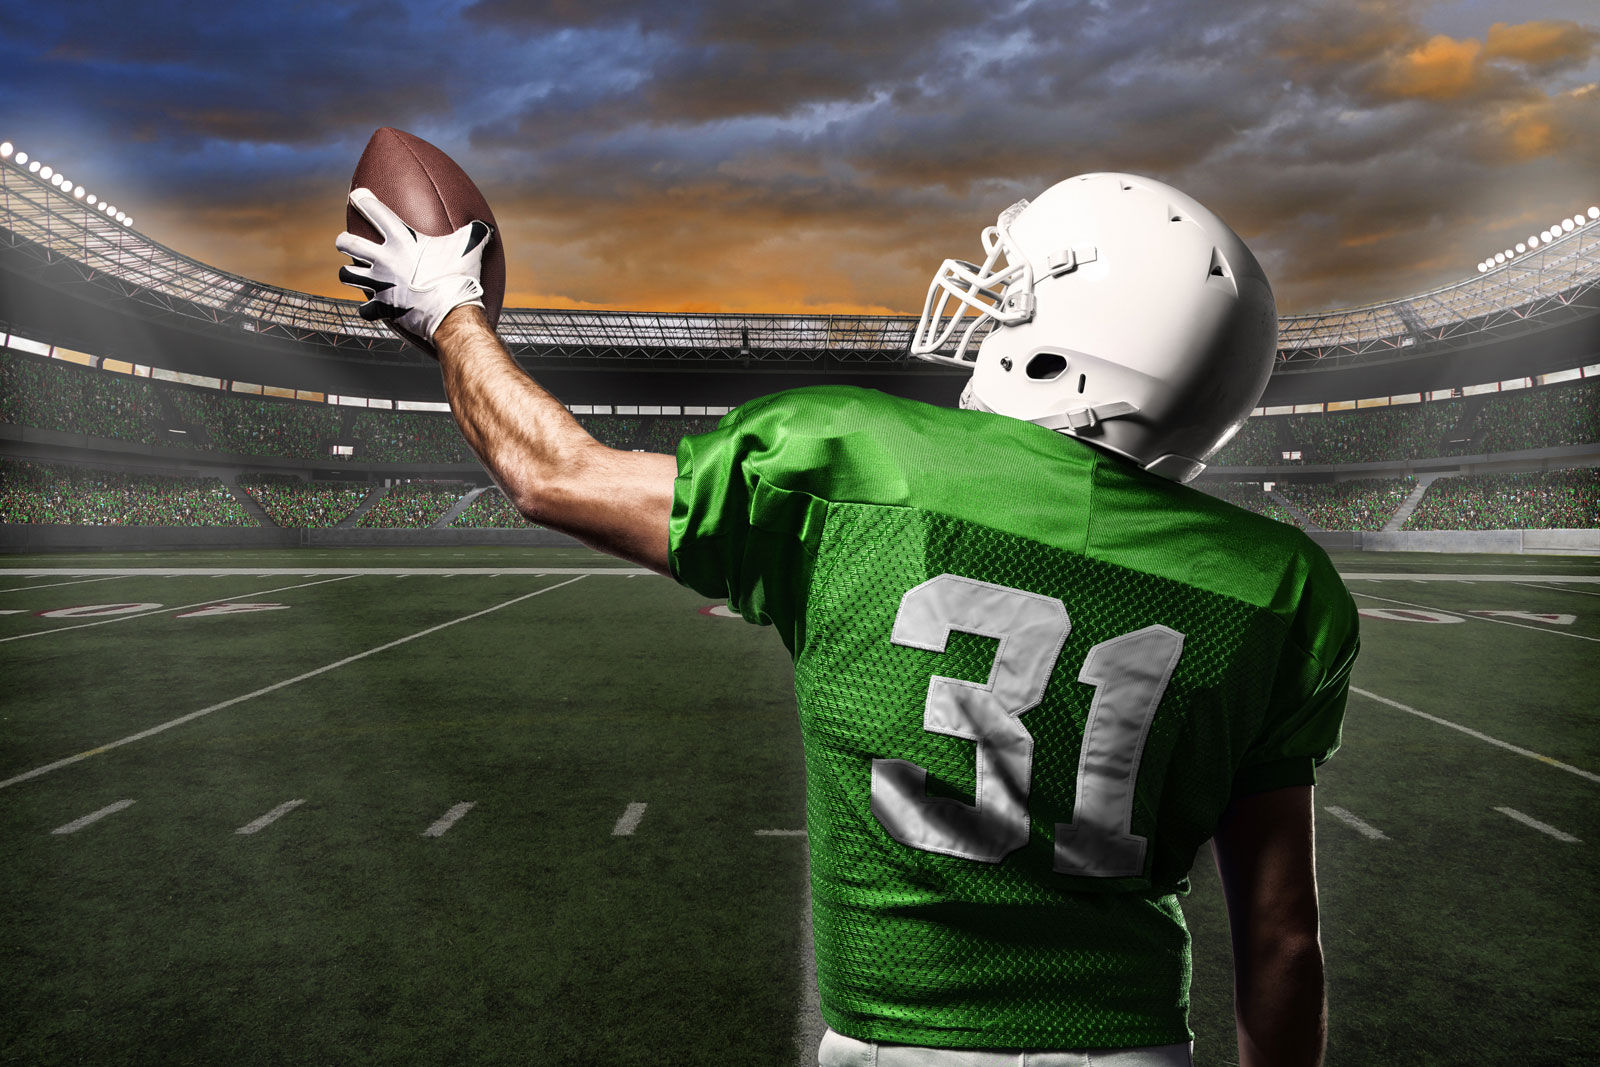 Calling all football fans. The Saskatchewan Roughriders 2019 season opener is around the corner. Catch all the Rider action when staying at hotels in Regina near Mosaic Stadium.